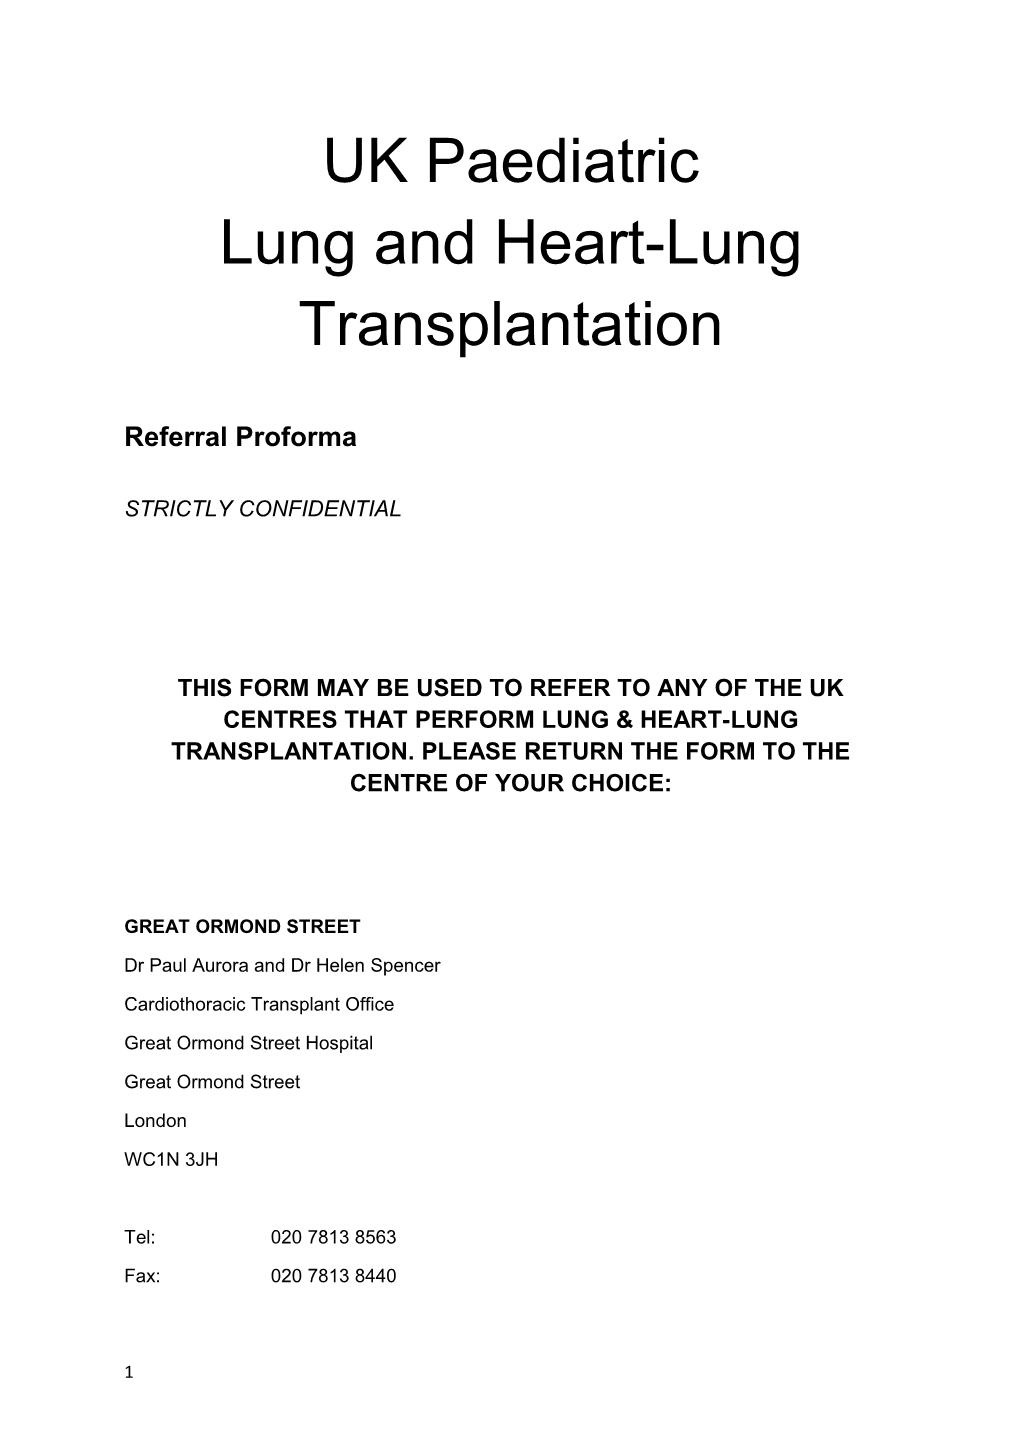 Lung and Heart-Lung Transplantation